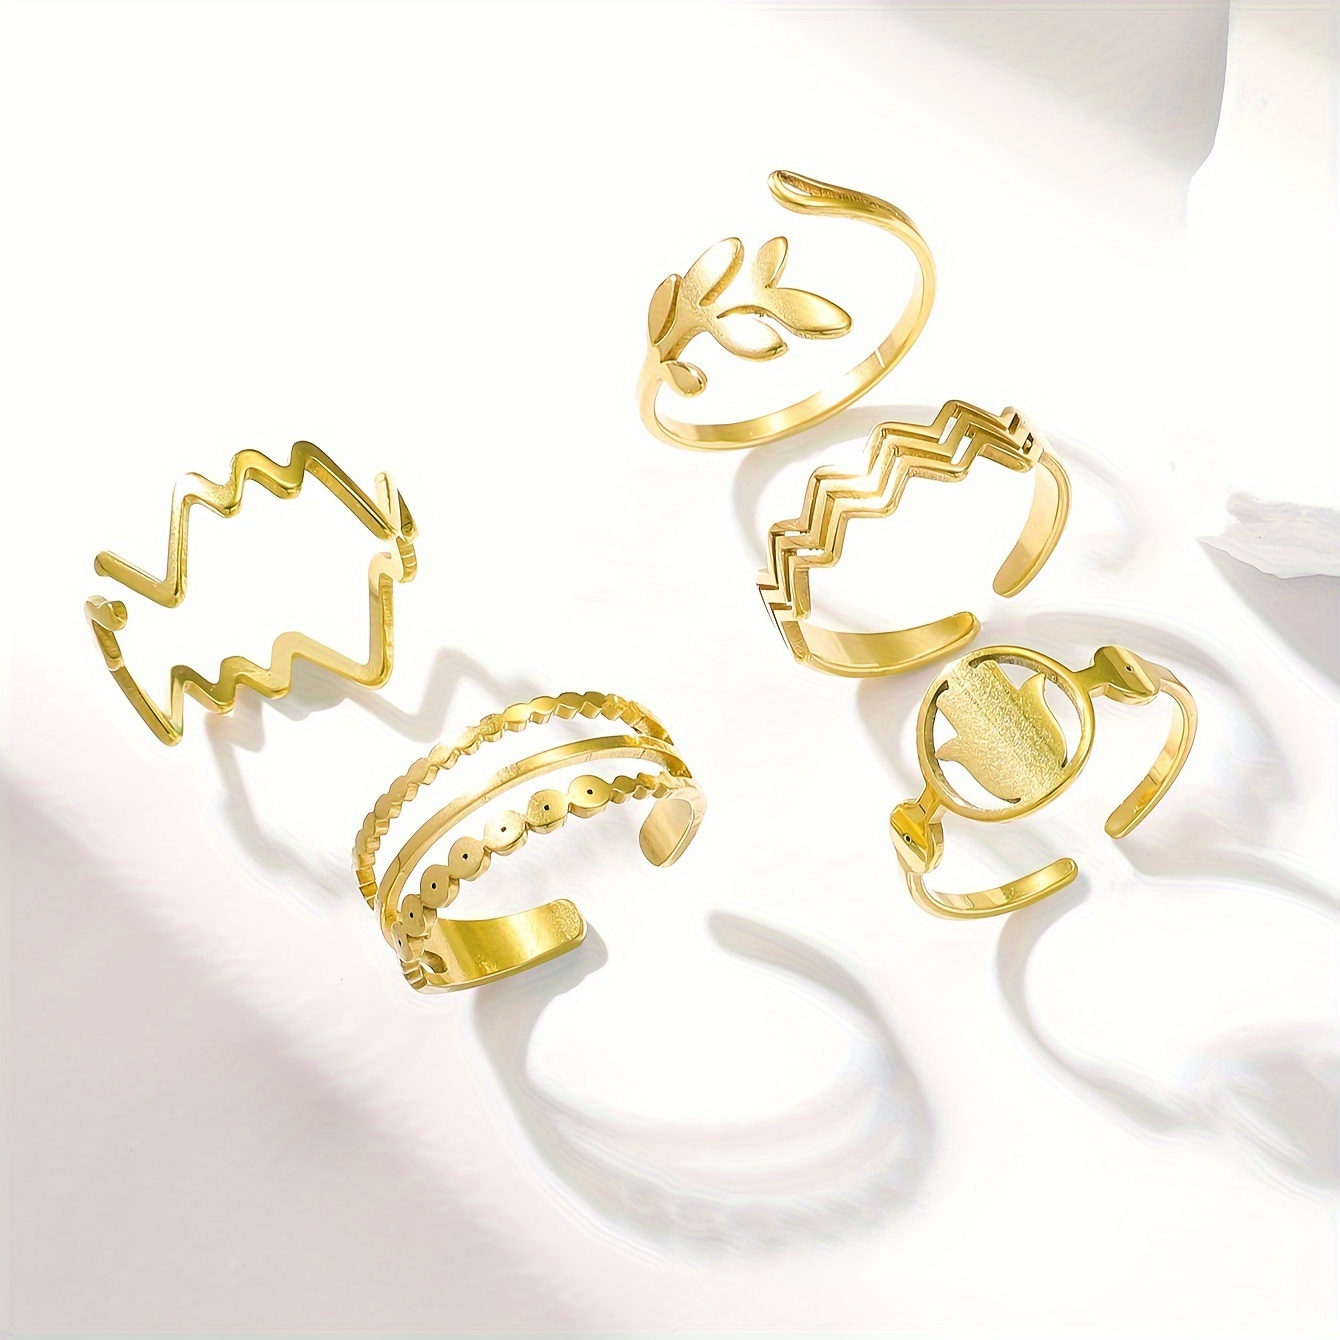 20 Pcs Adjustable Rings Set for Women - Finger Rings Pack Stackable Rings  for Teens- Cute Rings for Teen Girls -in Gold and Silver Tone, Metal